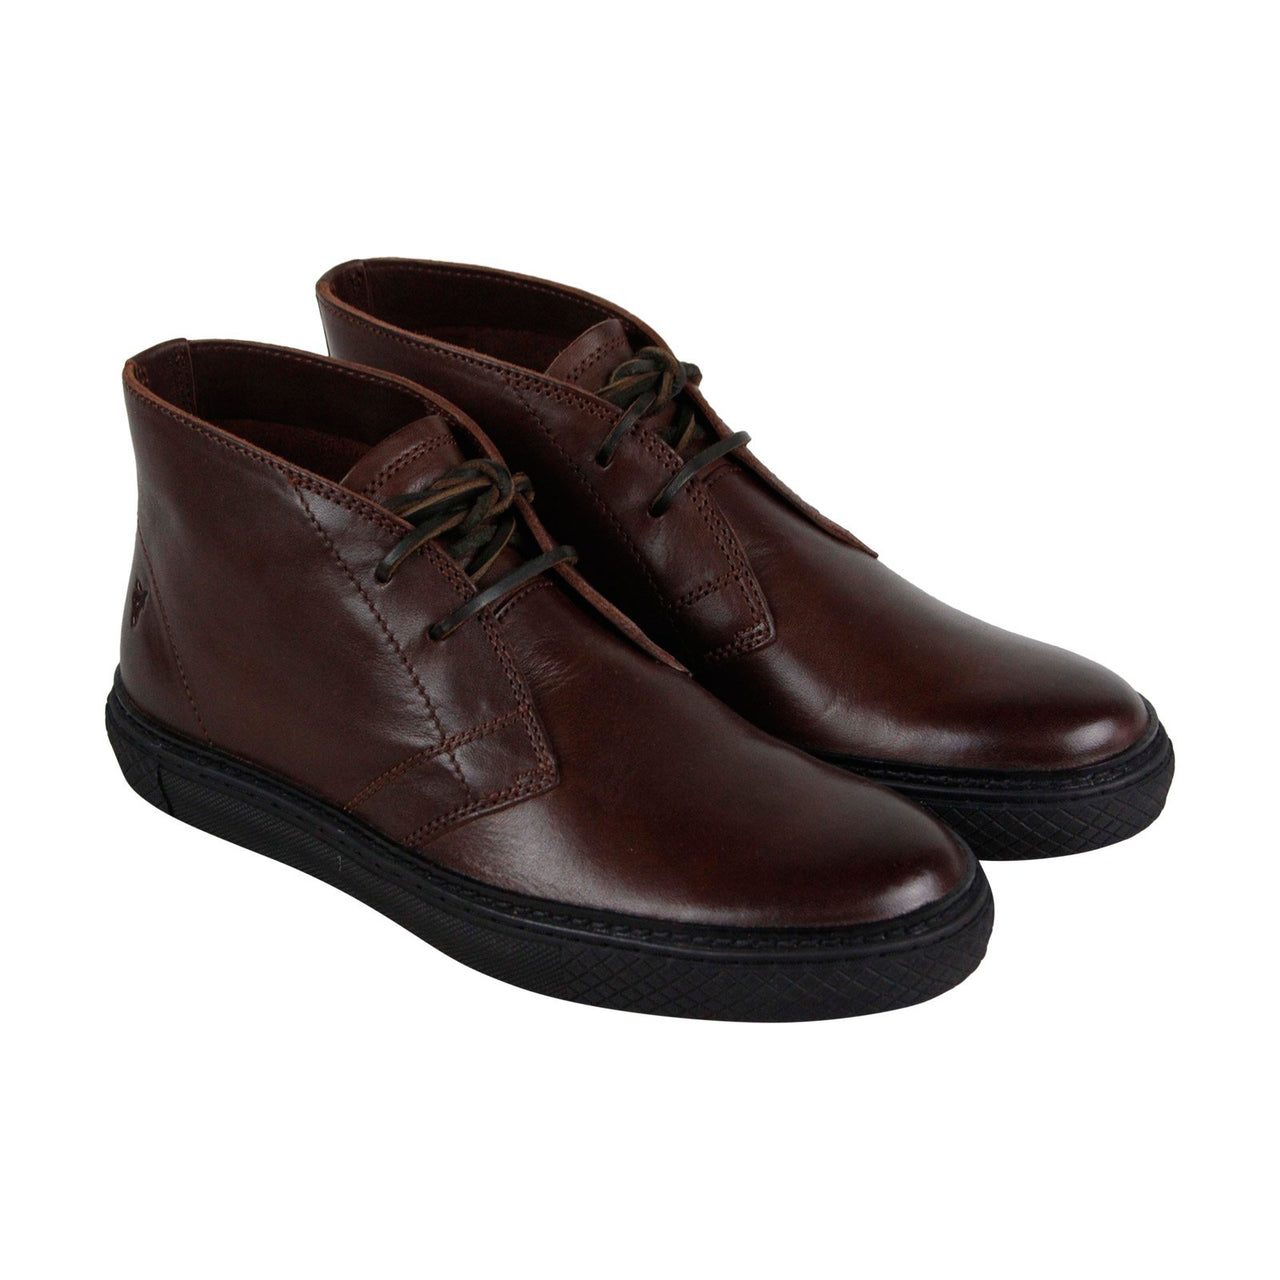 Frye Essex Chukka 80212 Mens Brown Leather Lace Up Chukkas Boots - Ruze ...